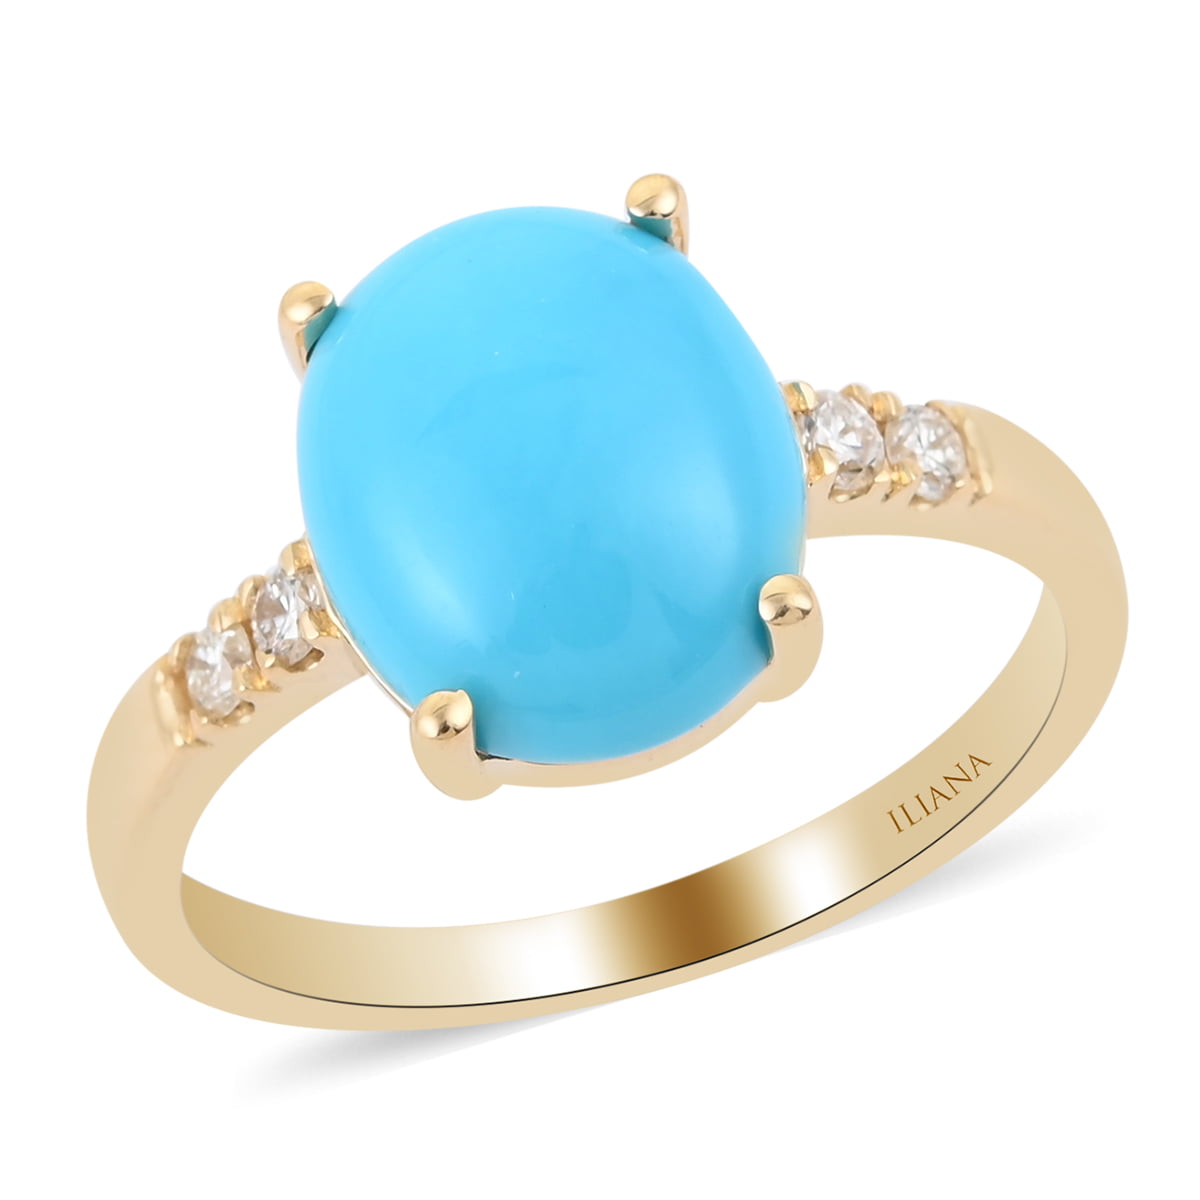 ARIZONA SLEEPING BEAUTY TURQUOISE 14K GOLD 925 Sterling Silver SOLITAIRE RING UK